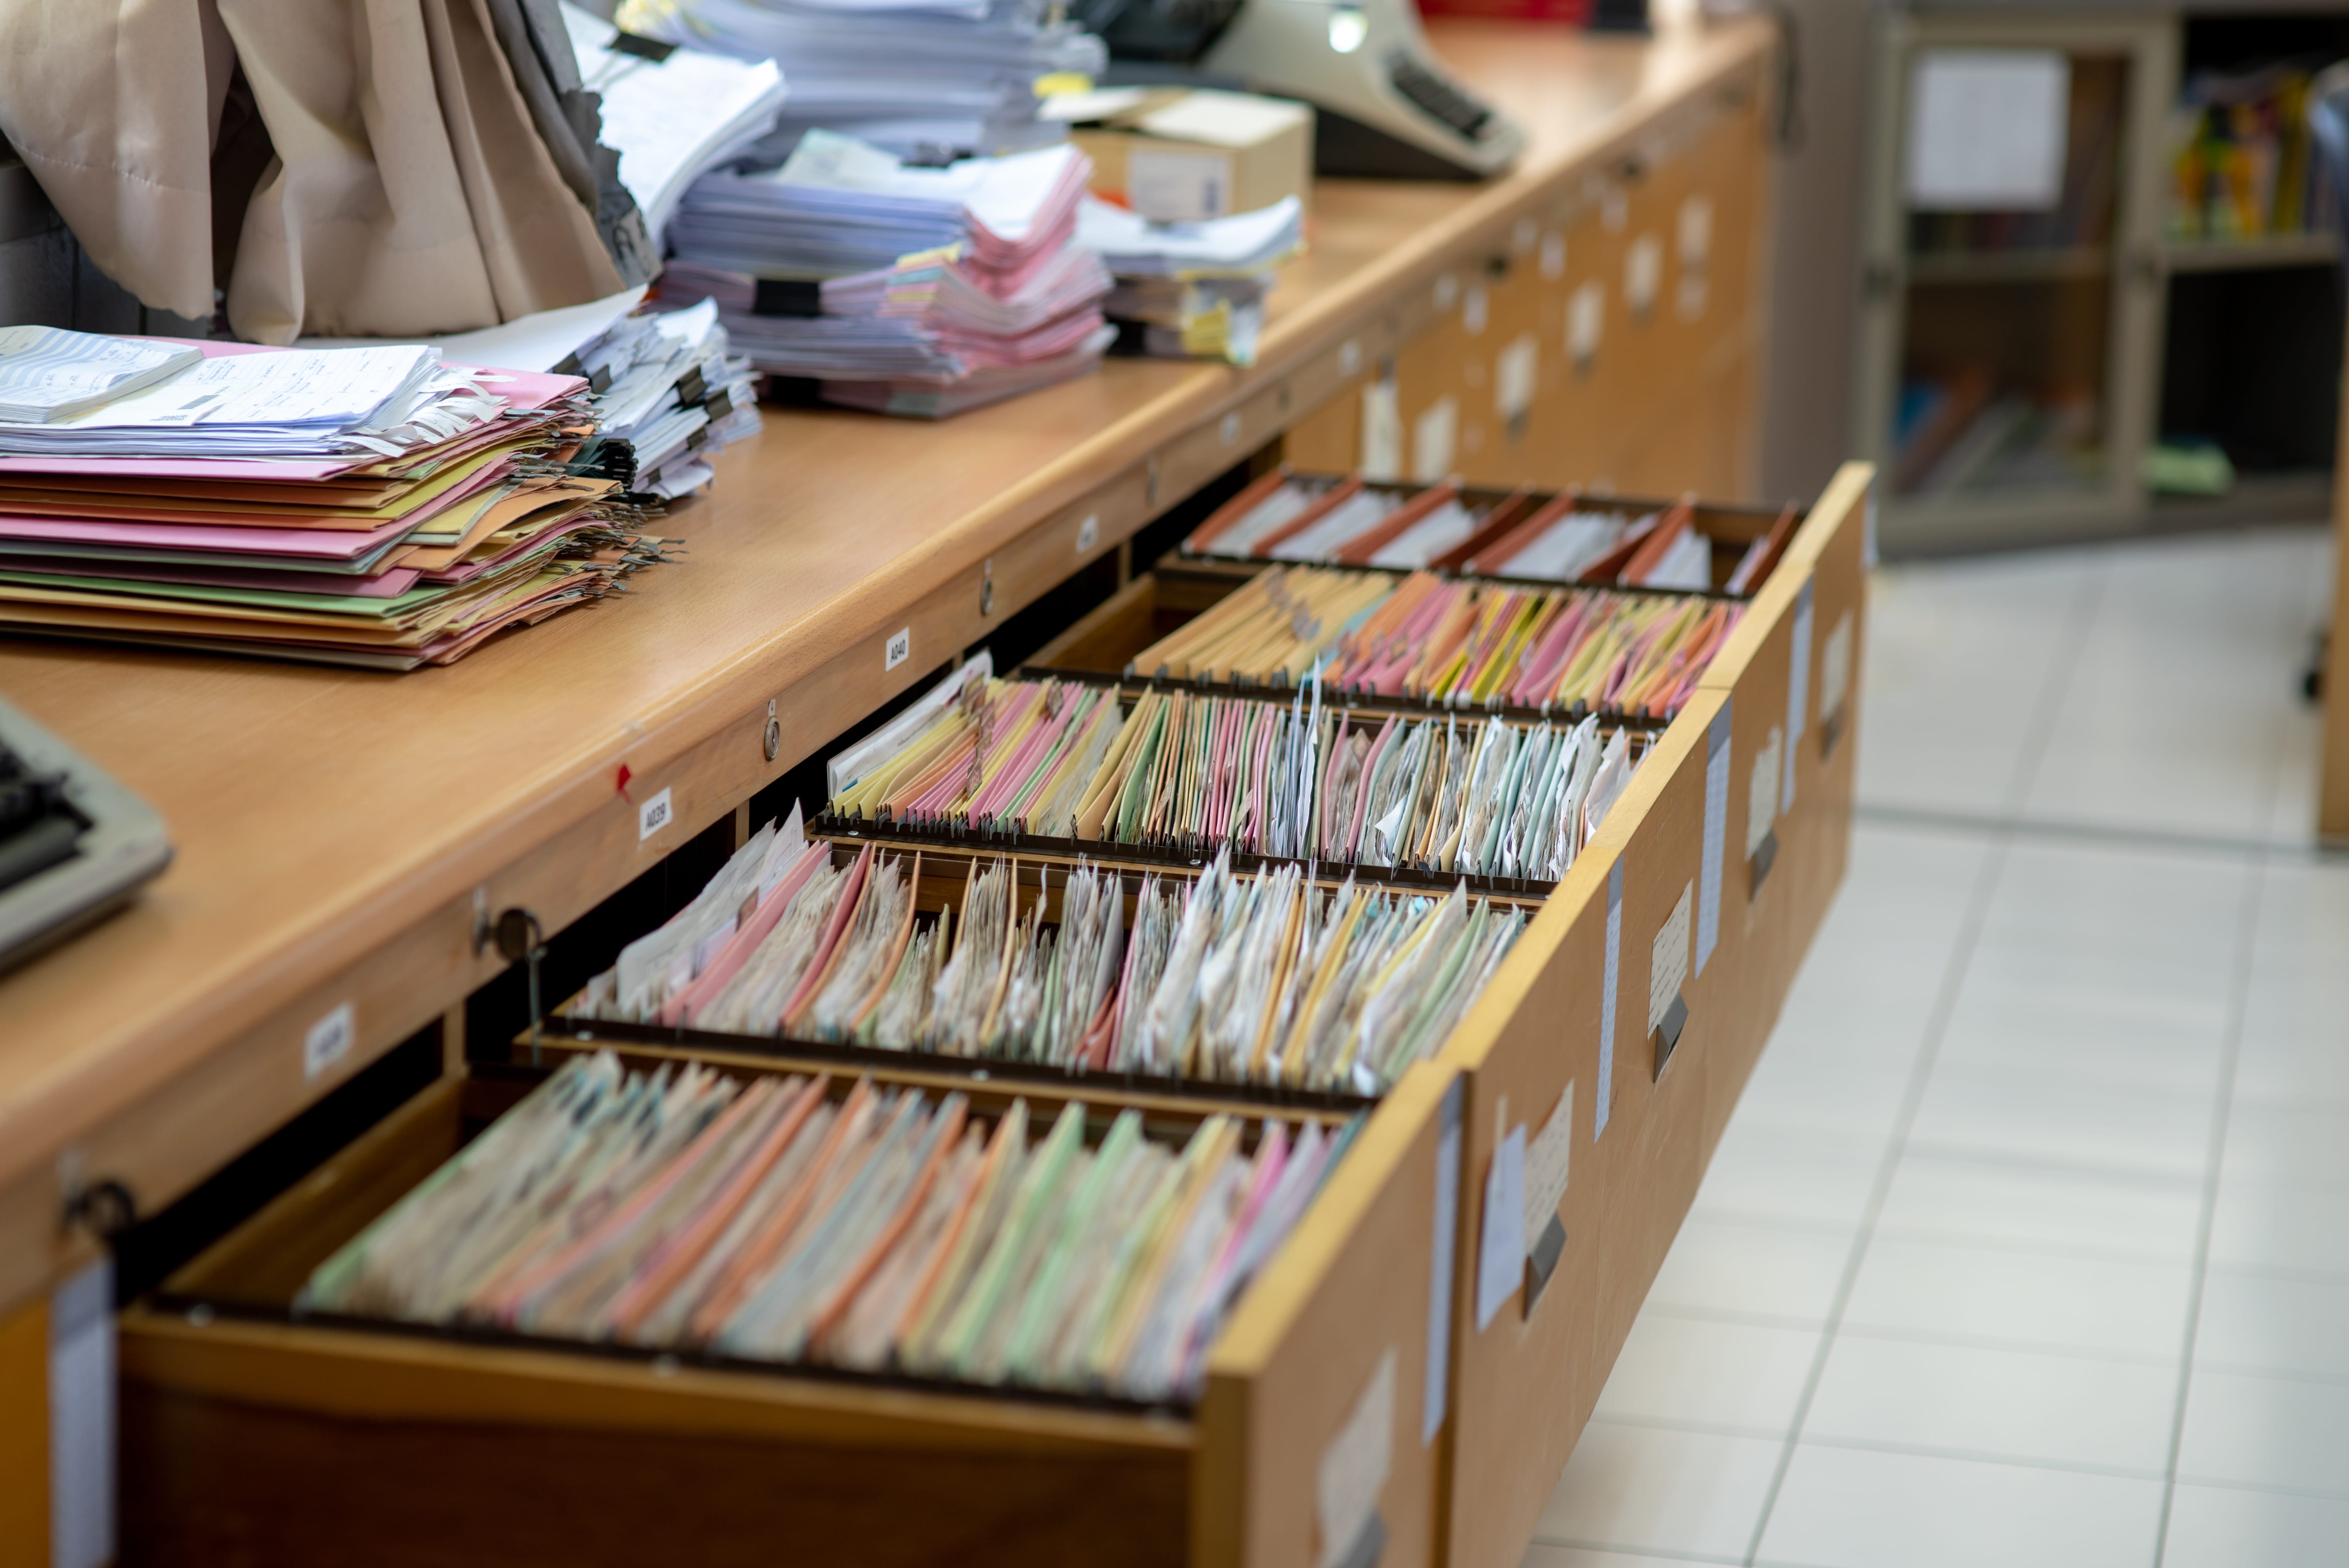 Medical records kept in filing cabinets.